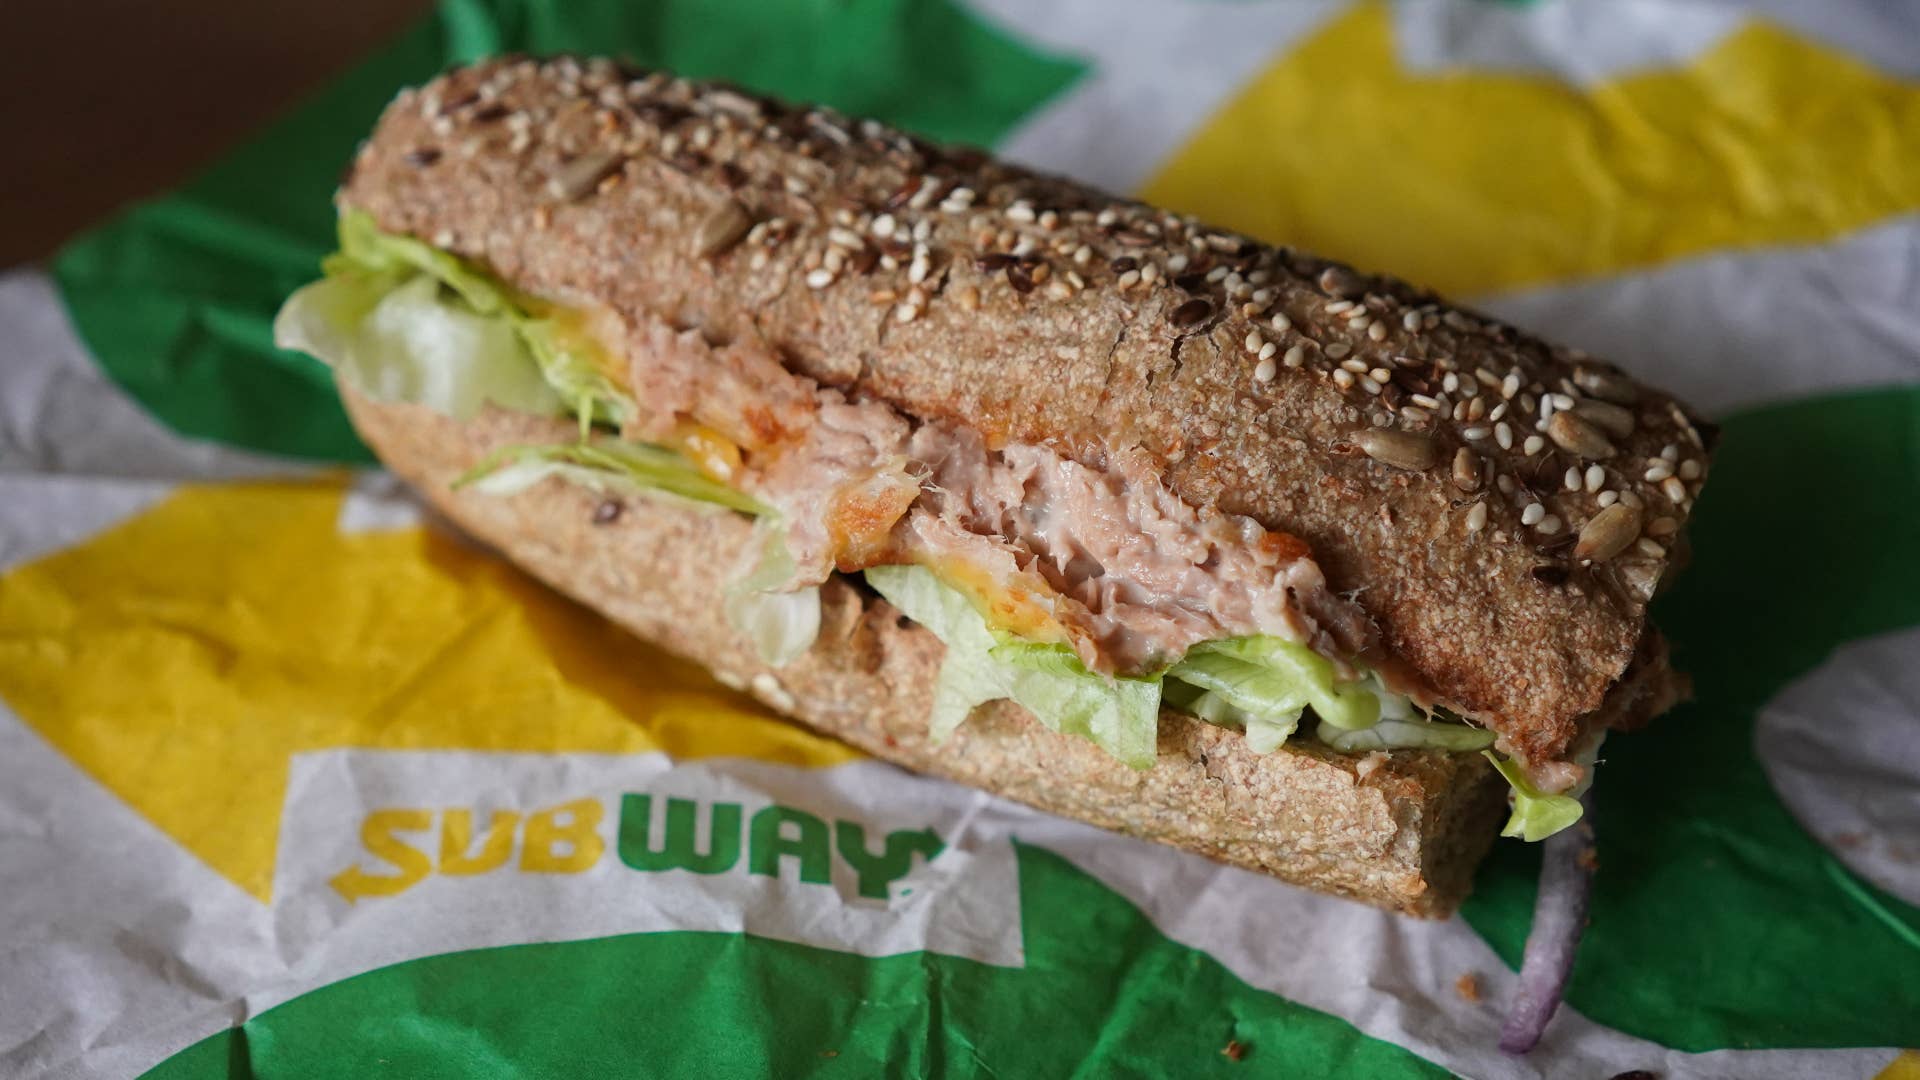 A "Tuna Sandwich" from the fast food chain "Subway" lies on a table.